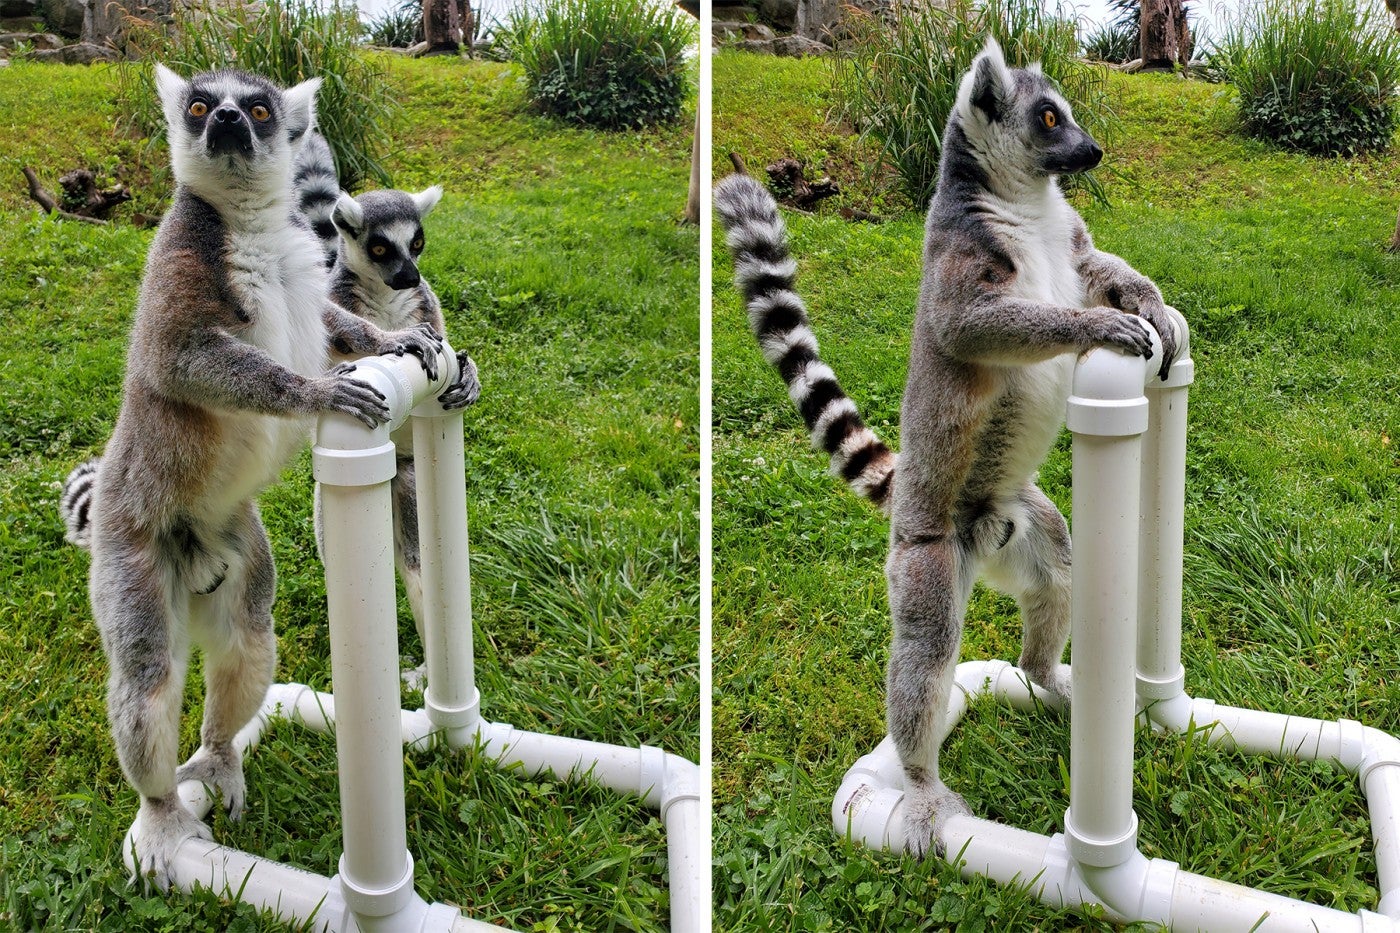 From left to right: Ring-tailed lemurs Bowie, Birch and Tom Petty participate in "t-stand" training sessions.